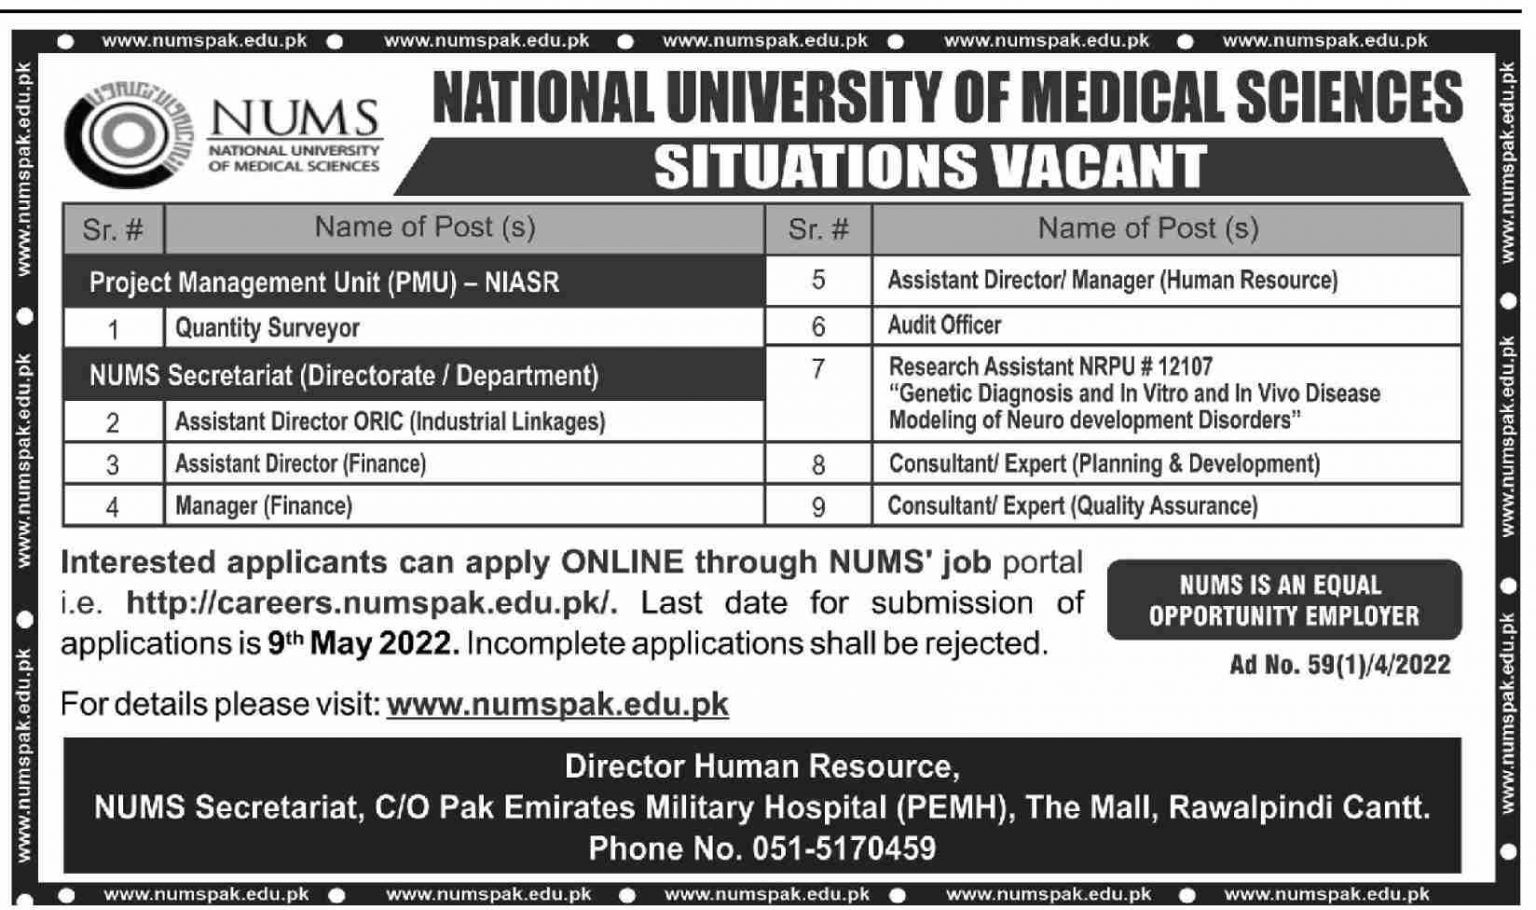 Latest Govt Jobs At National University of Medical Sciences jobs 2022